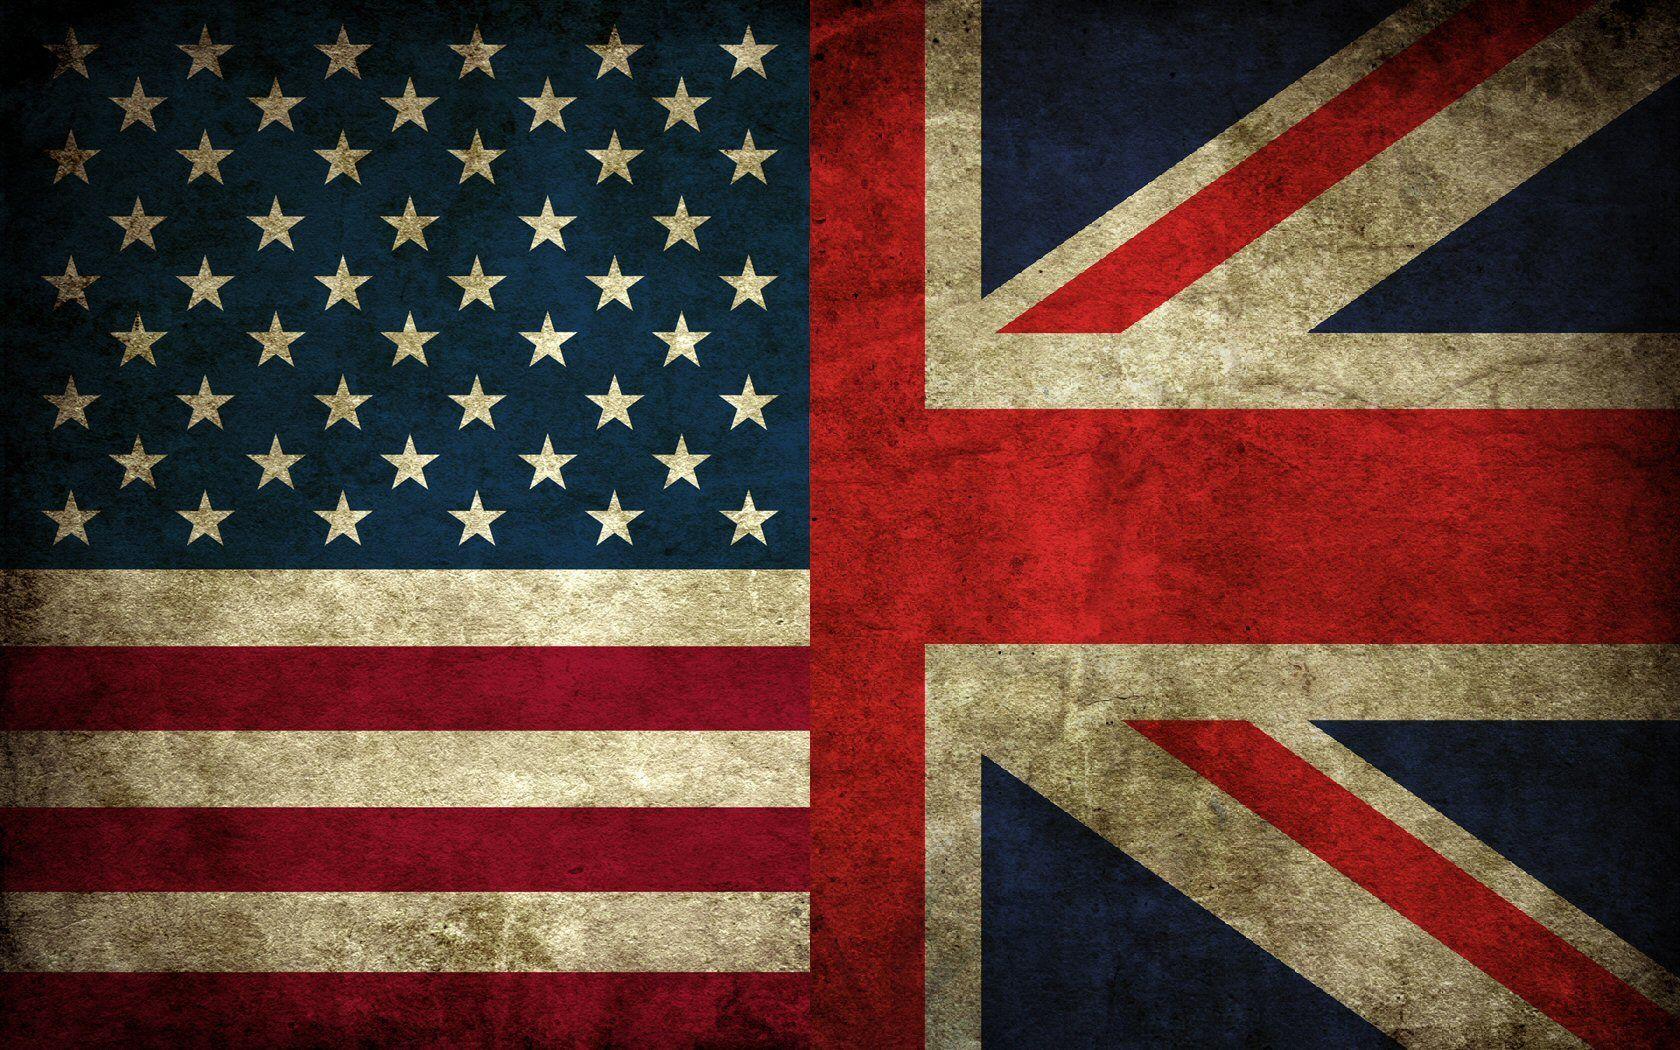 Britain Flags Usa Union Jack Fresh New HD Wallpaper Your Popular